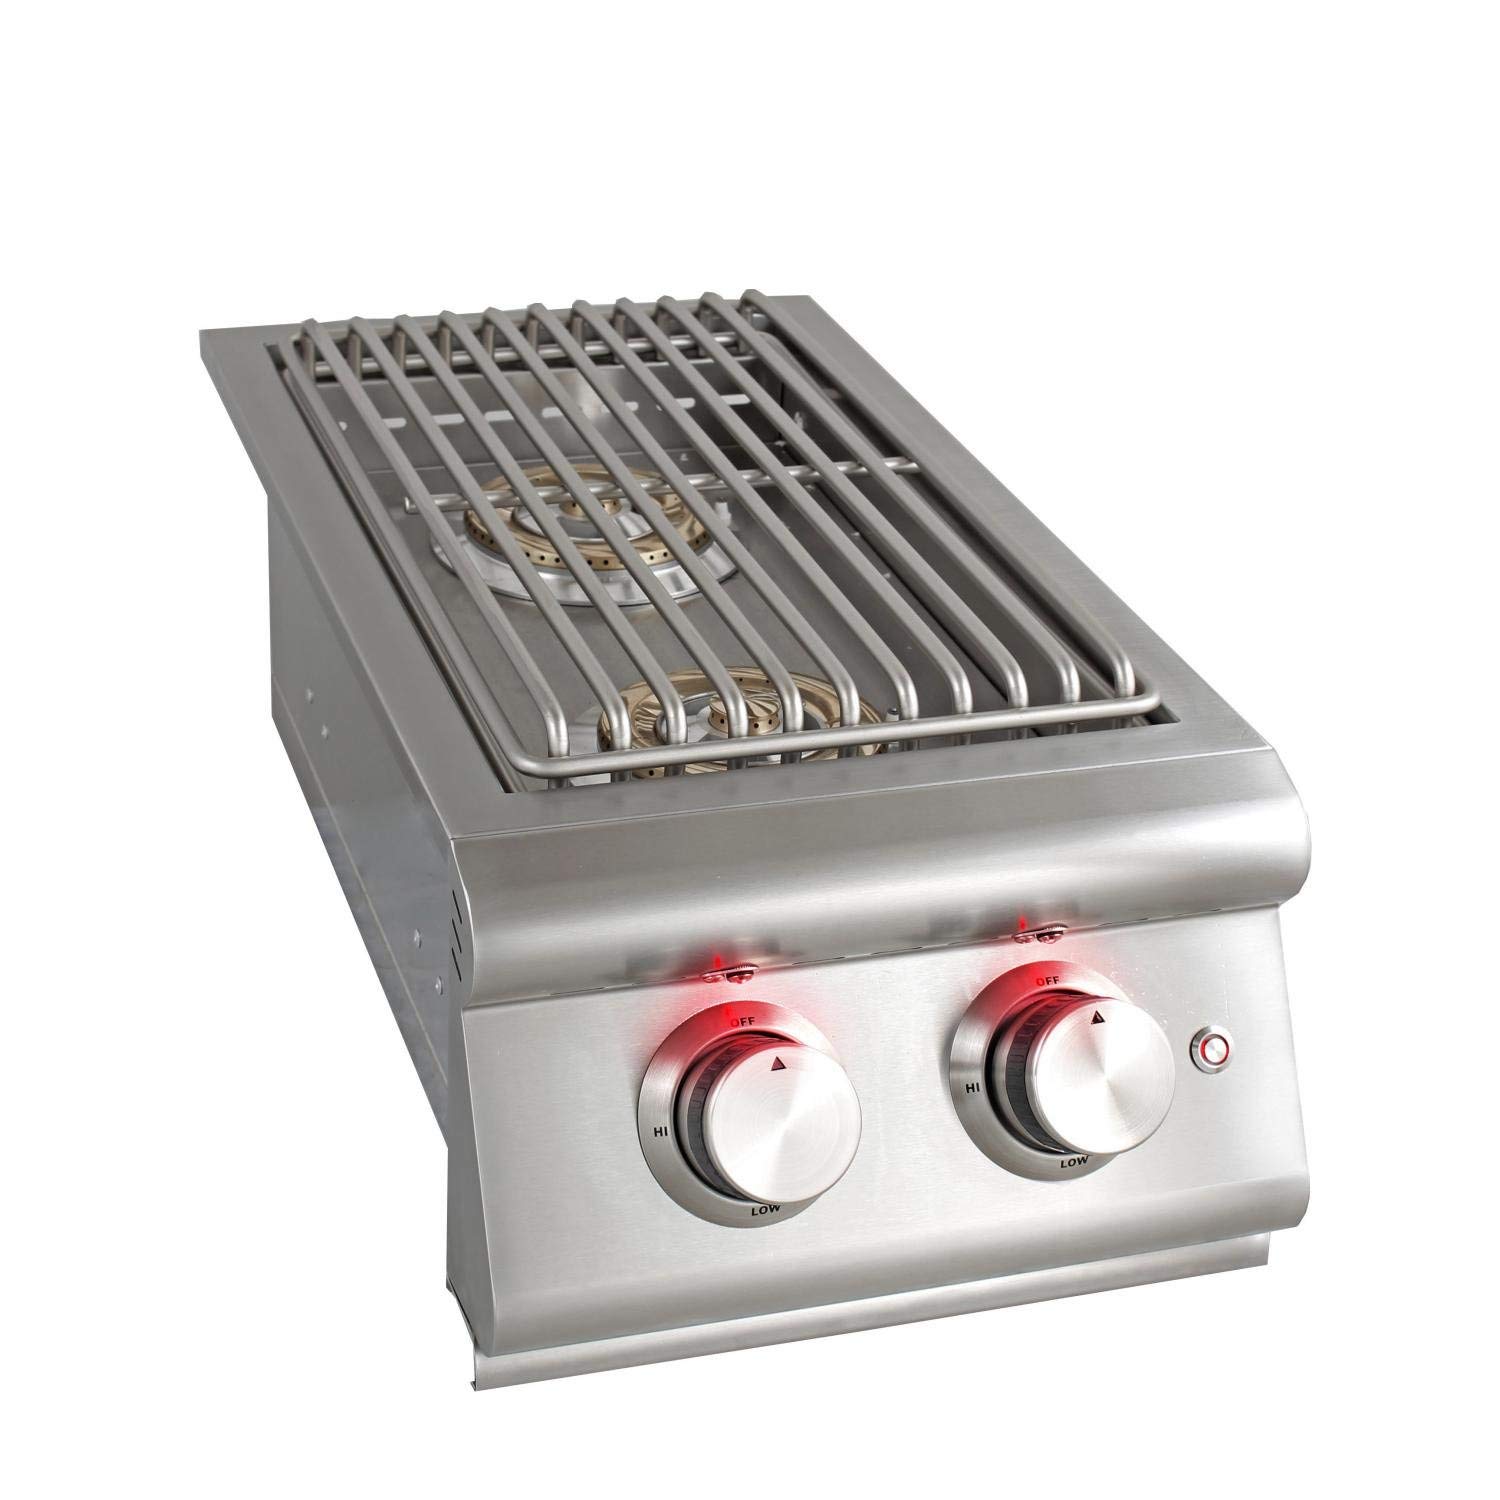 Barbecue Unit - Buy Electric, Charcoal and Propane Grills At Best Prices